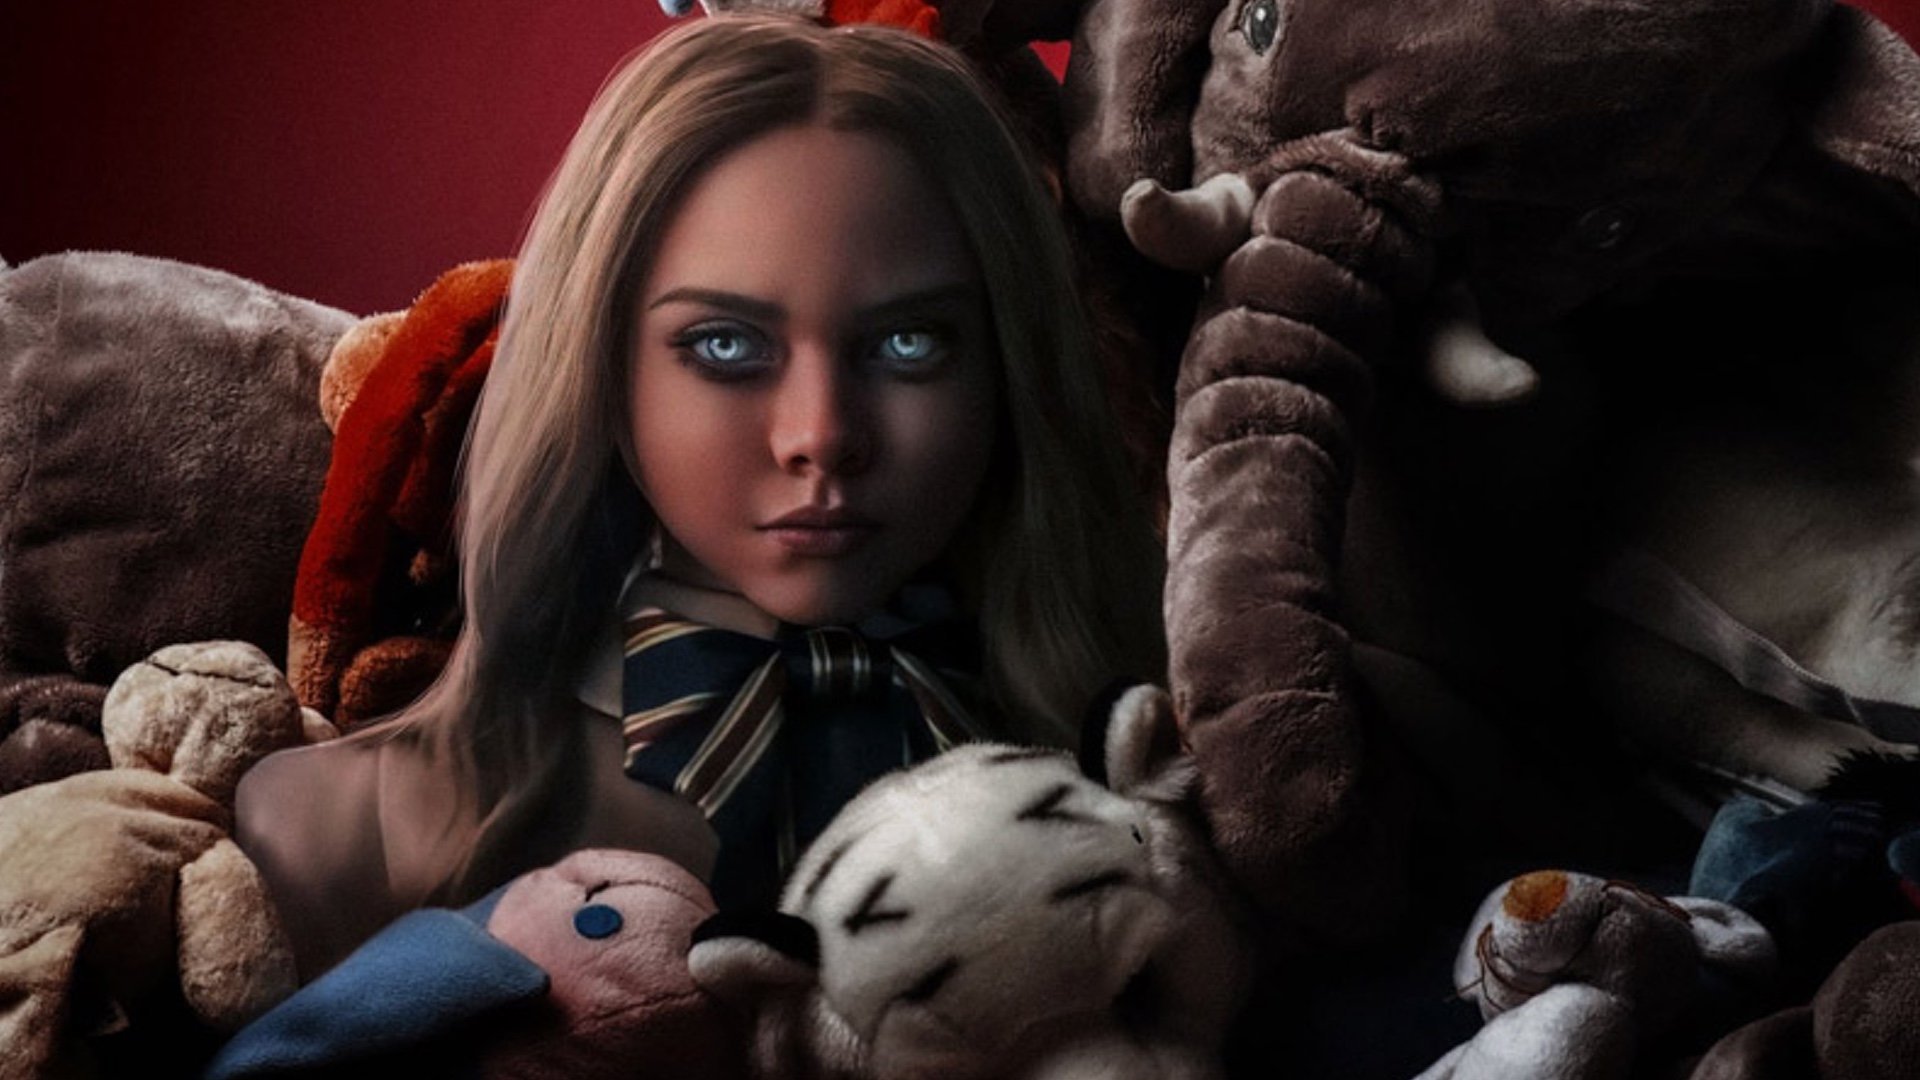 New Promo For M3GAN Explores The Playful Creepiness of The Killer AI Doll